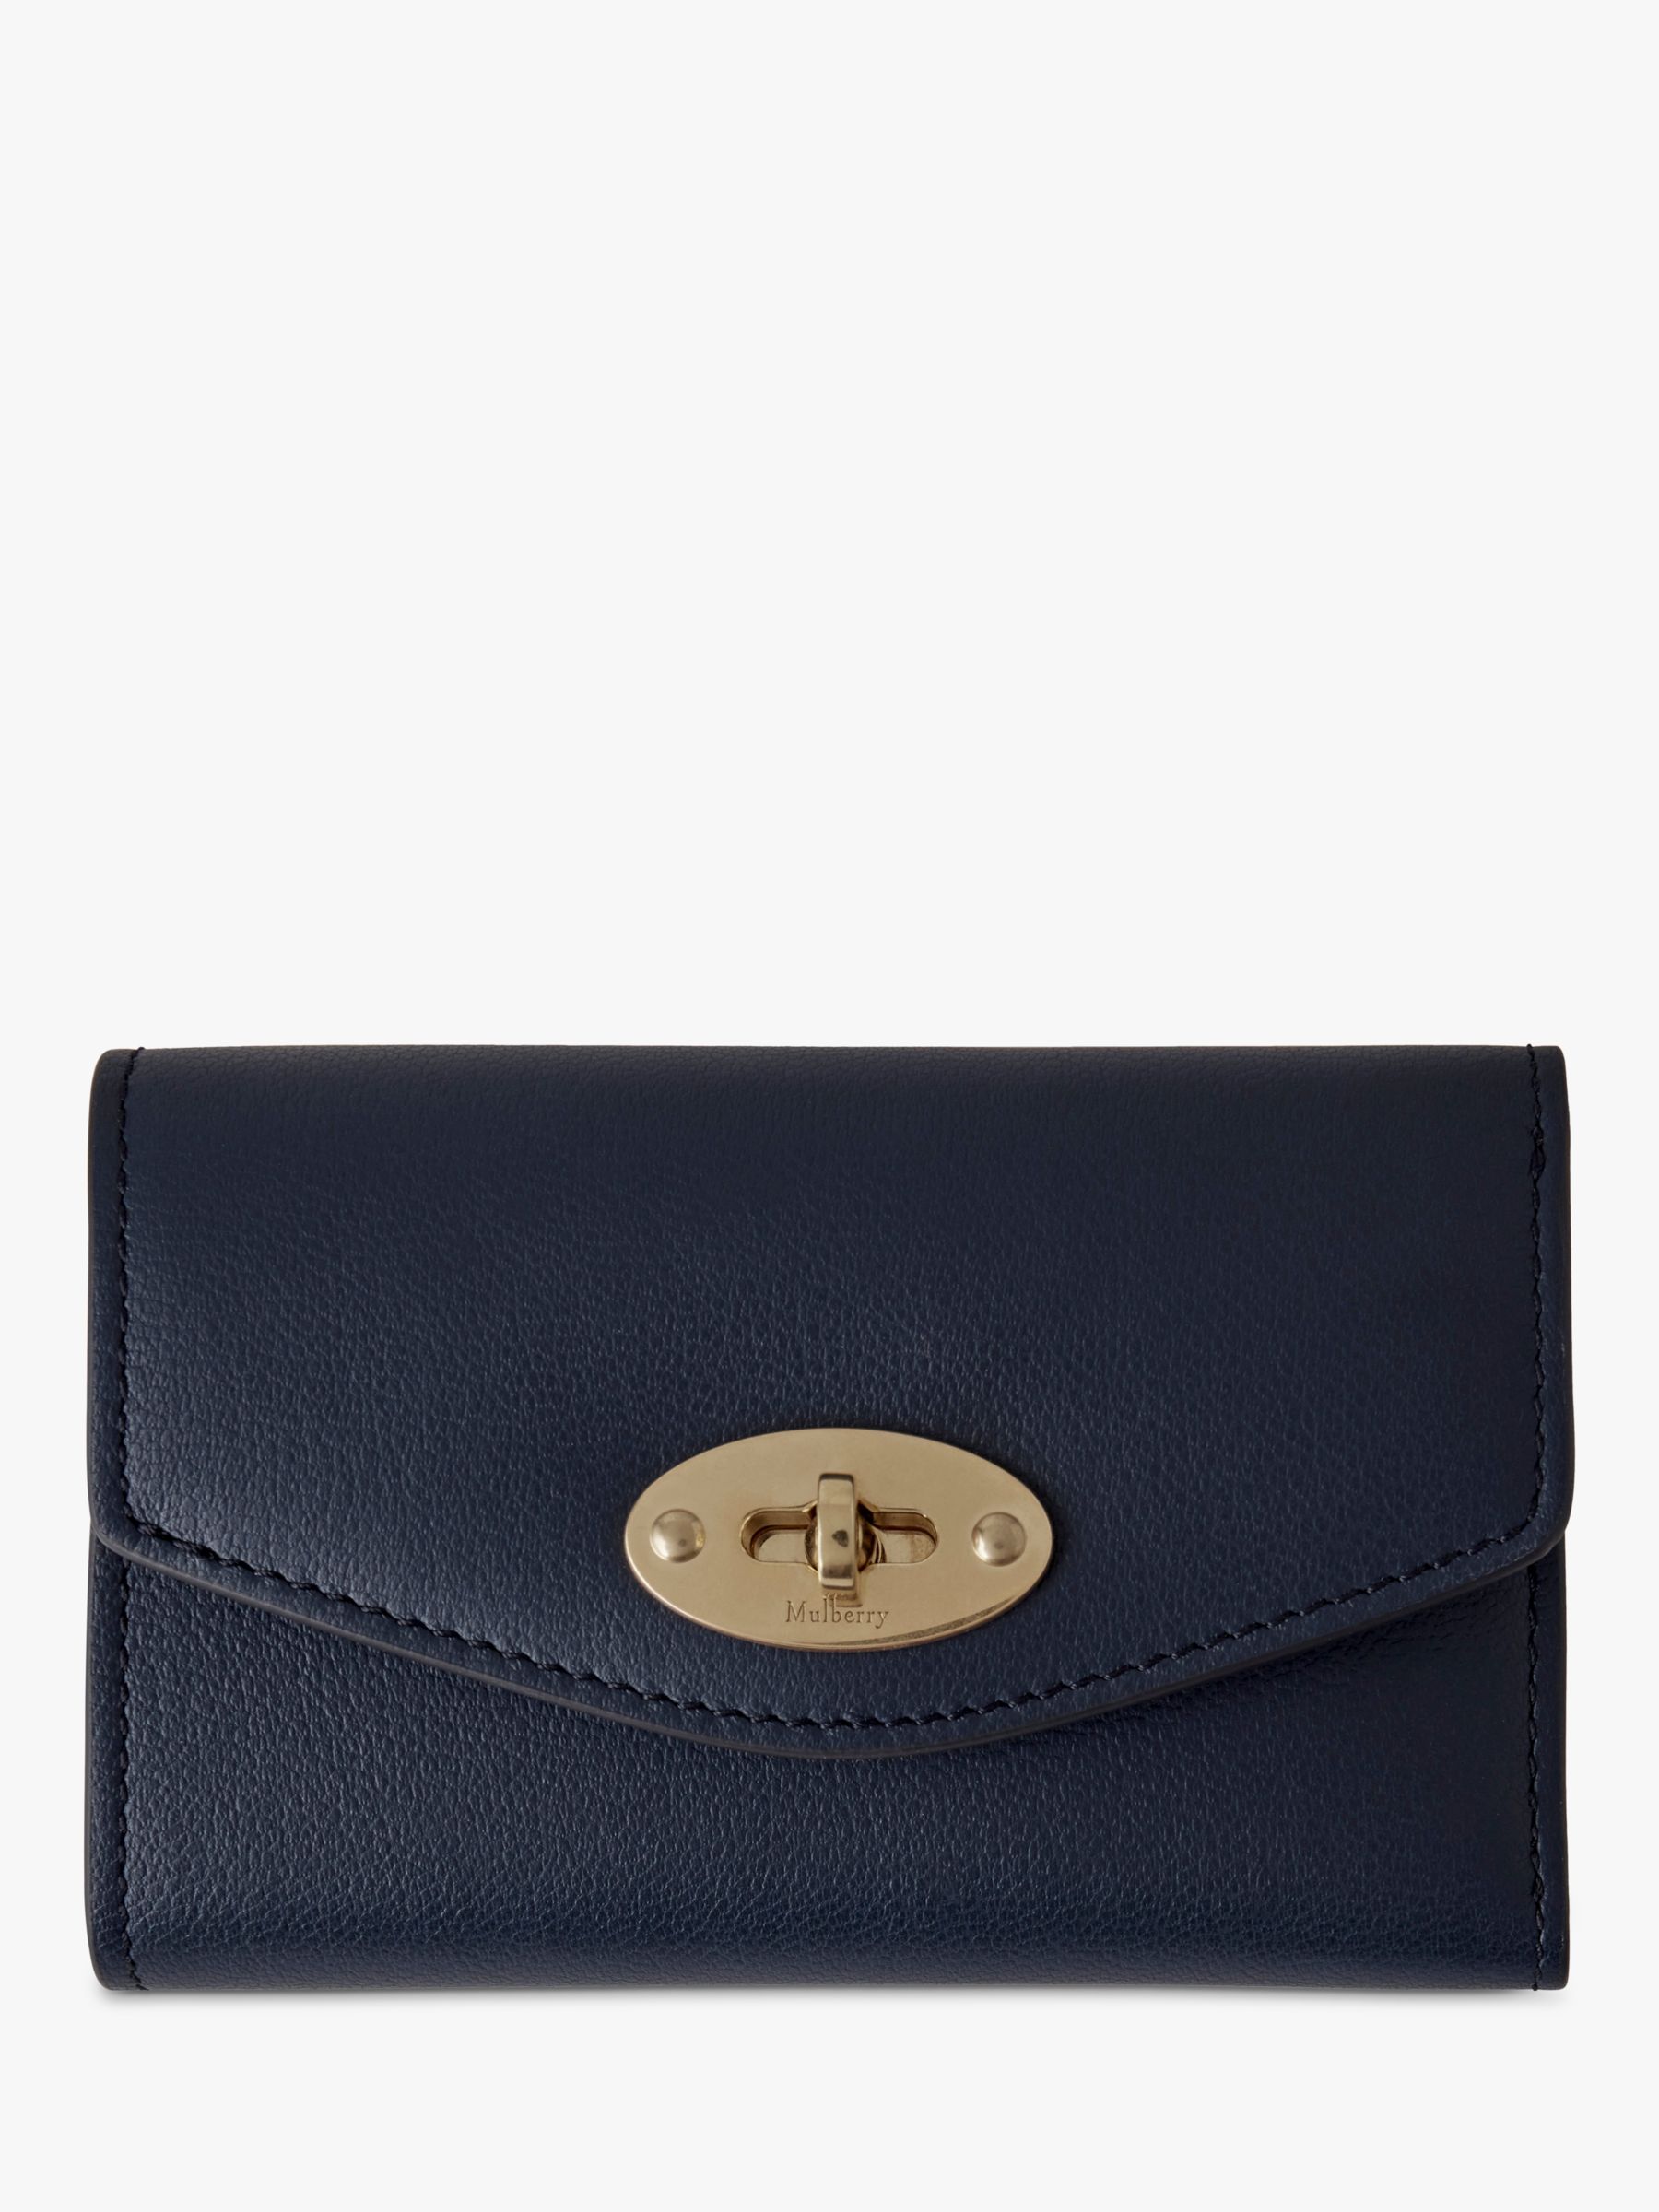 Buy Mulberry Darley Folded Multi-Card Micro Classic Grain Leather Wallet Online at johnlewis.com